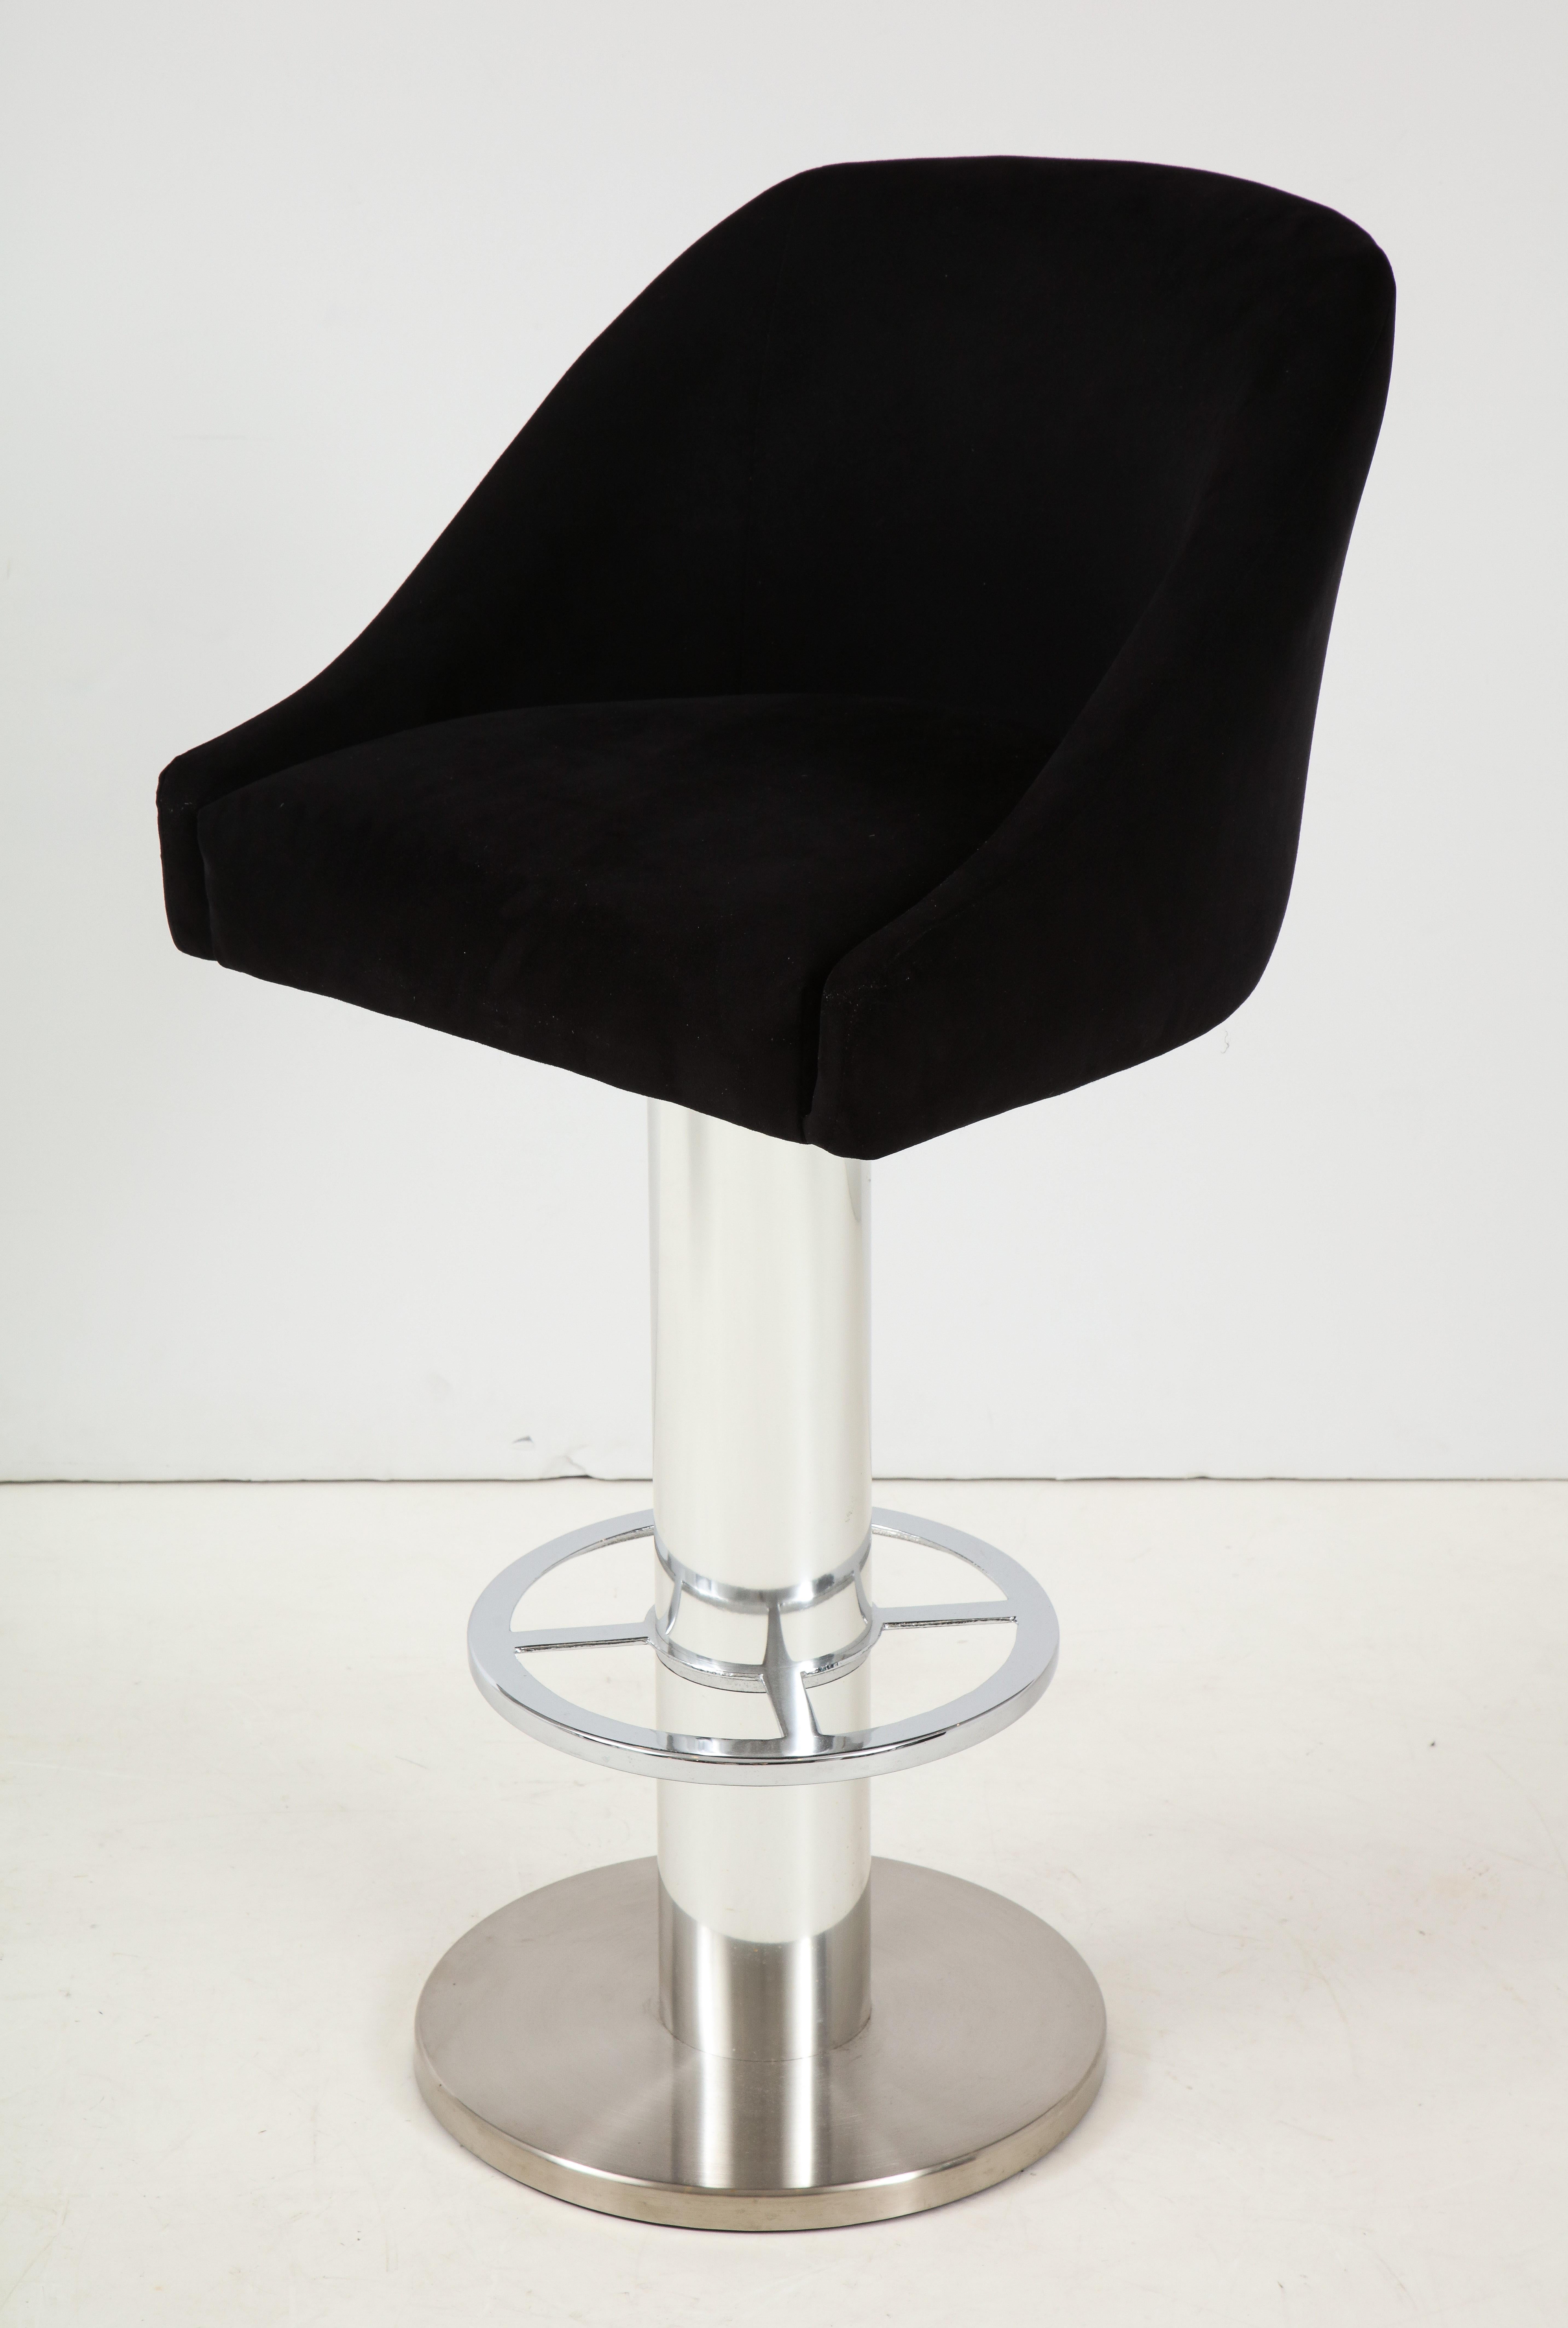 Set of Four Design For Leisure Barstools in Chrome and Ultrasuede In Good Condition For Sale In New York, NY